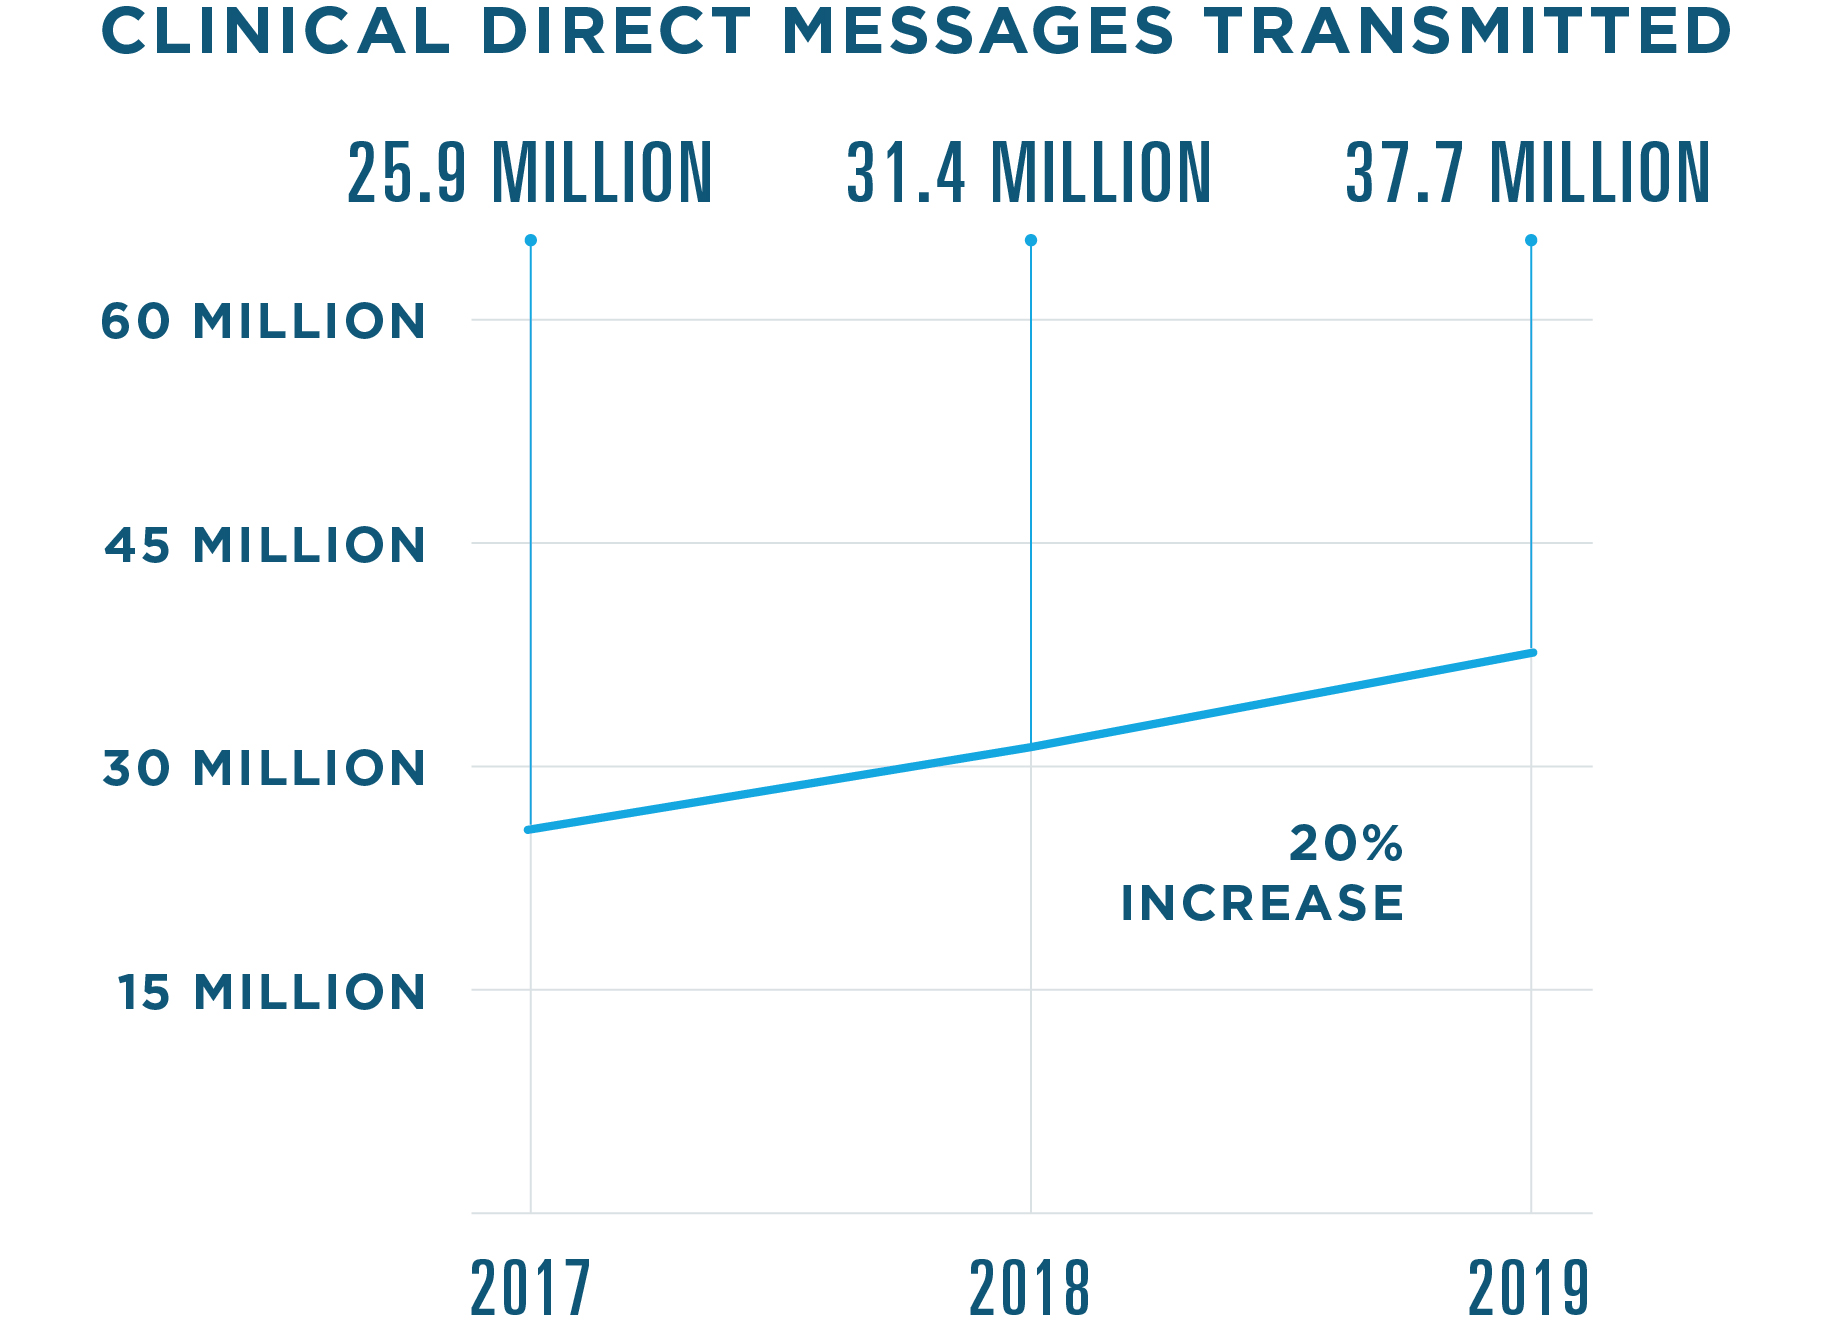 37.7 million clinical Direct messages were sent in 2019, a 20% increase from 31.4 million in 2018. 25.9 million were sent in 2017.